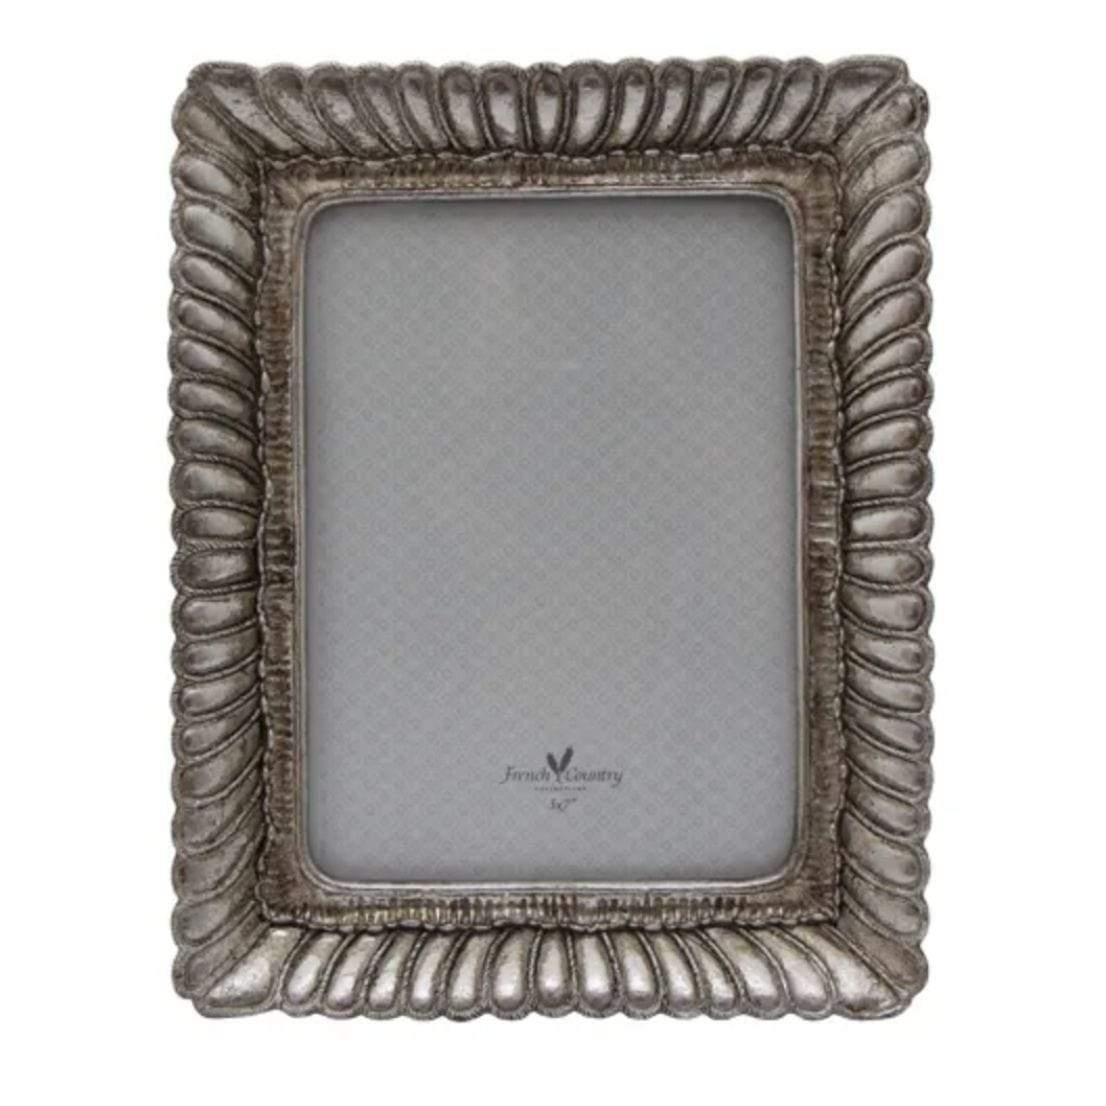 Fanned Rectangle Frame Pewter Finish 5x7" House of Dudley